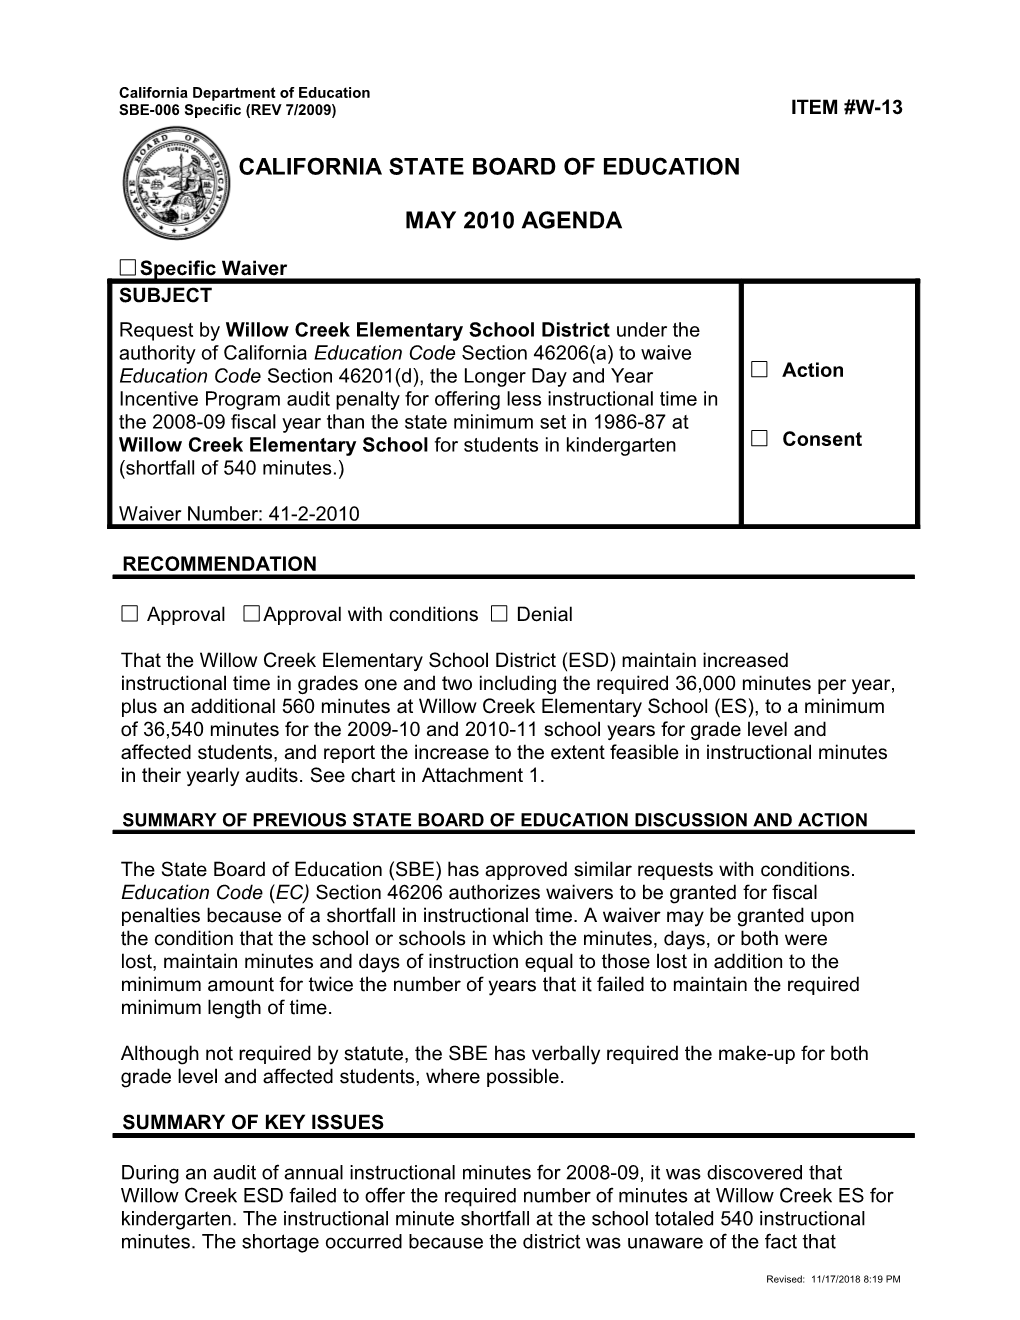 May 2010 Waiver Item W13 - Meeting Agendas (CA State Board of Education)